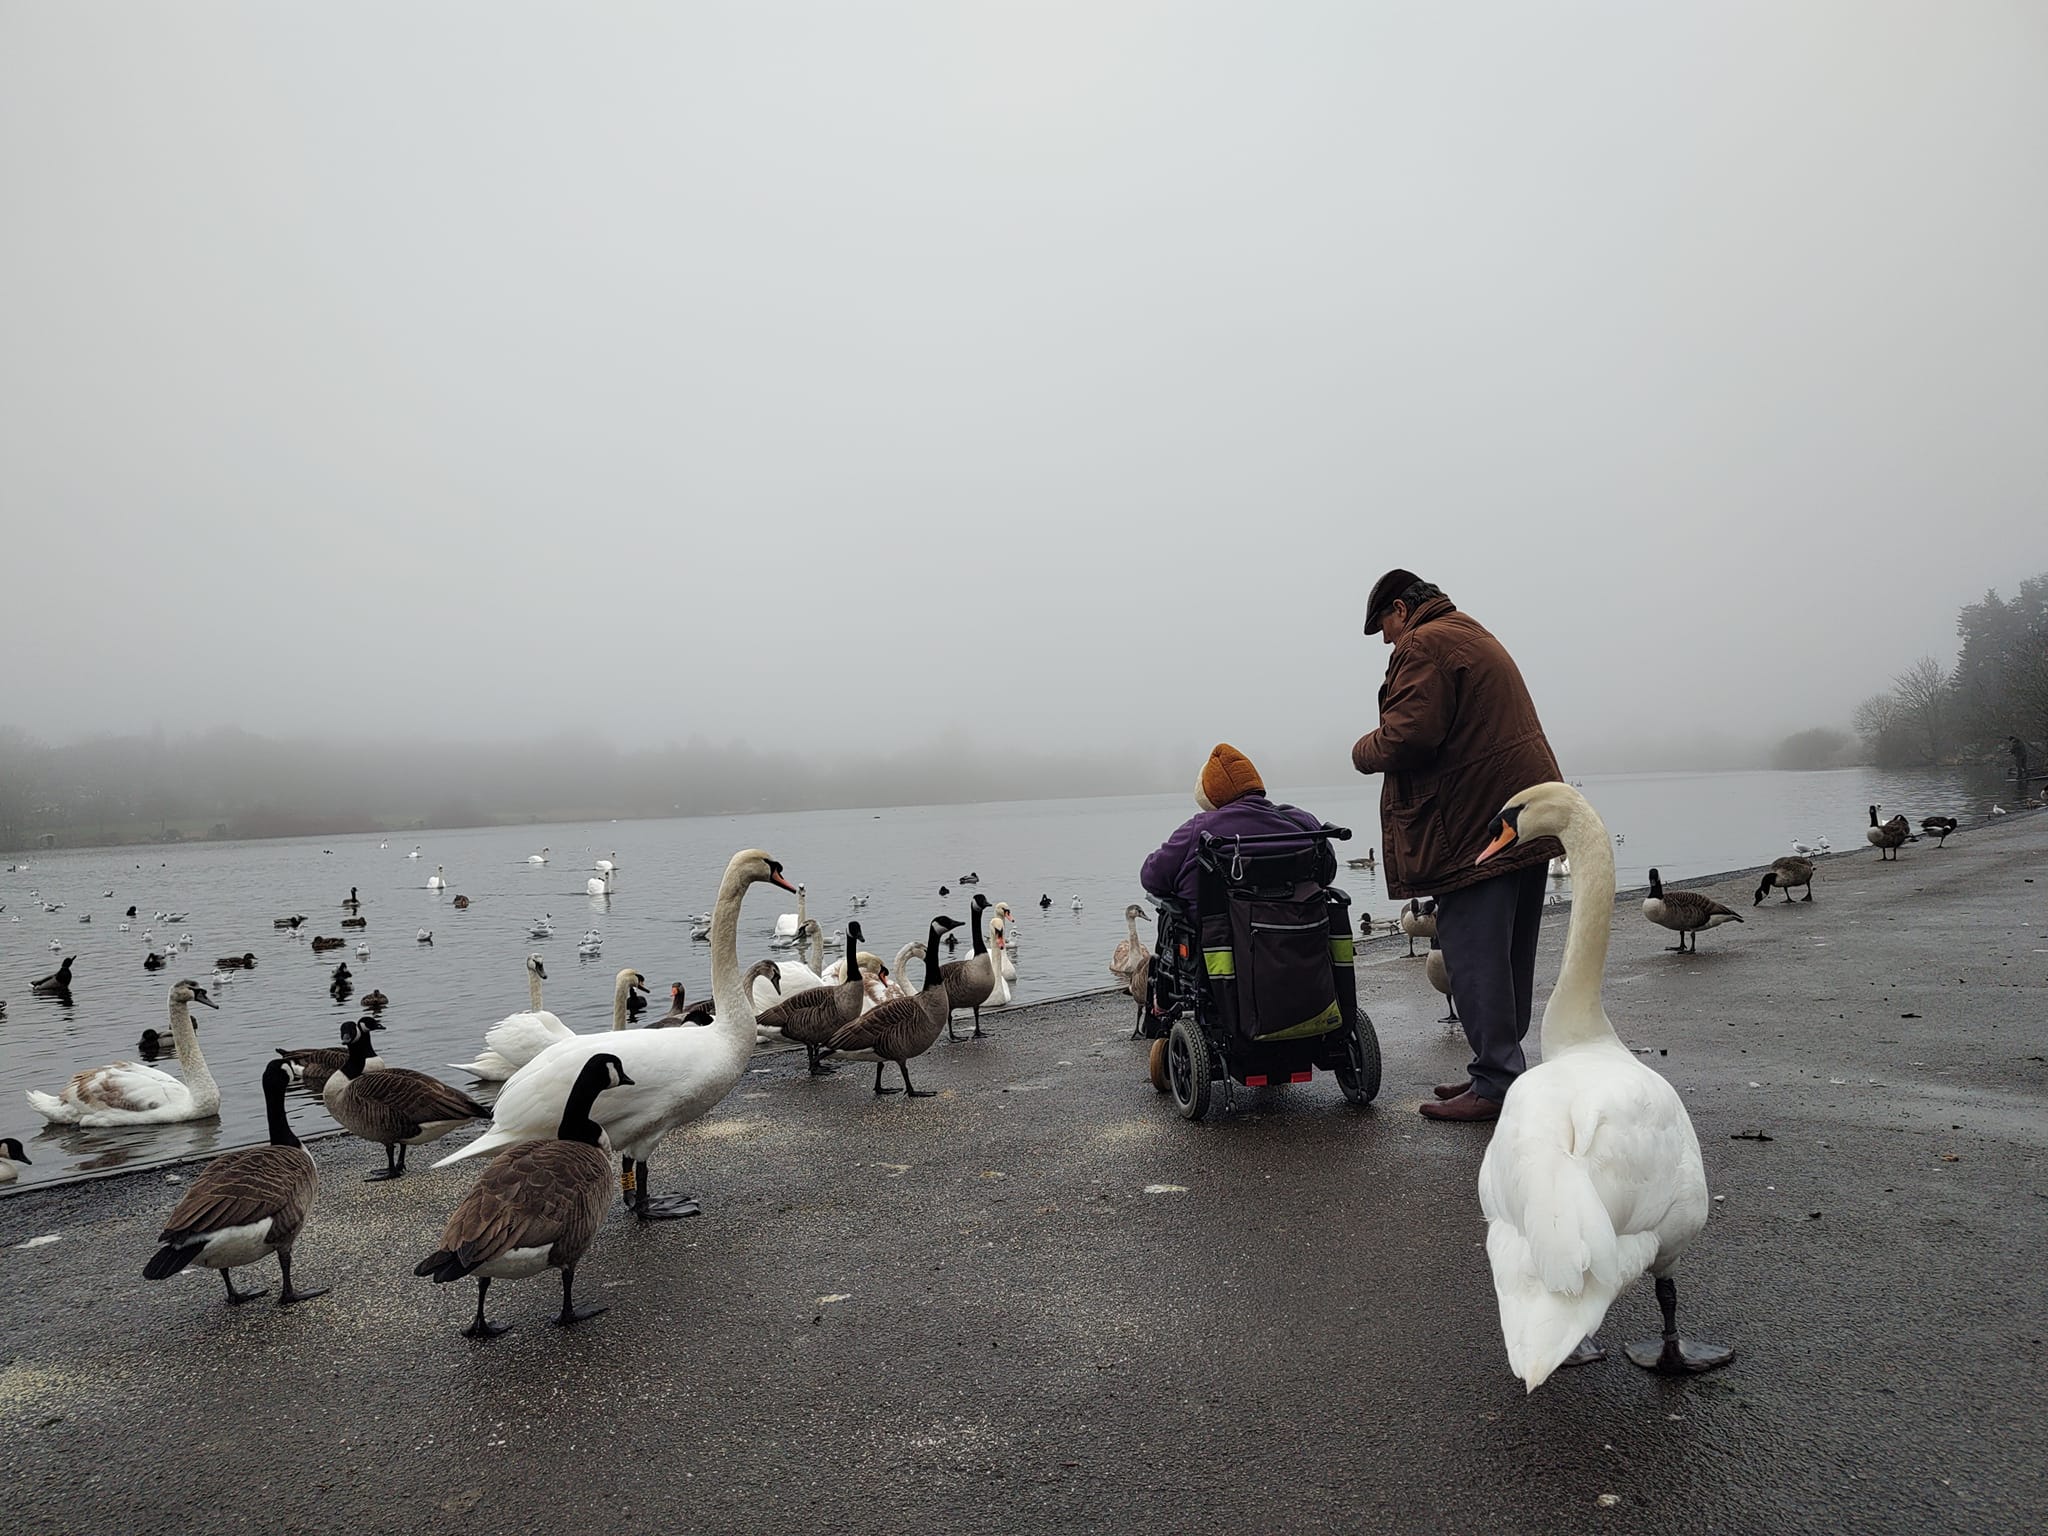 A man and woman in a wheelchair feeding swans by a lake